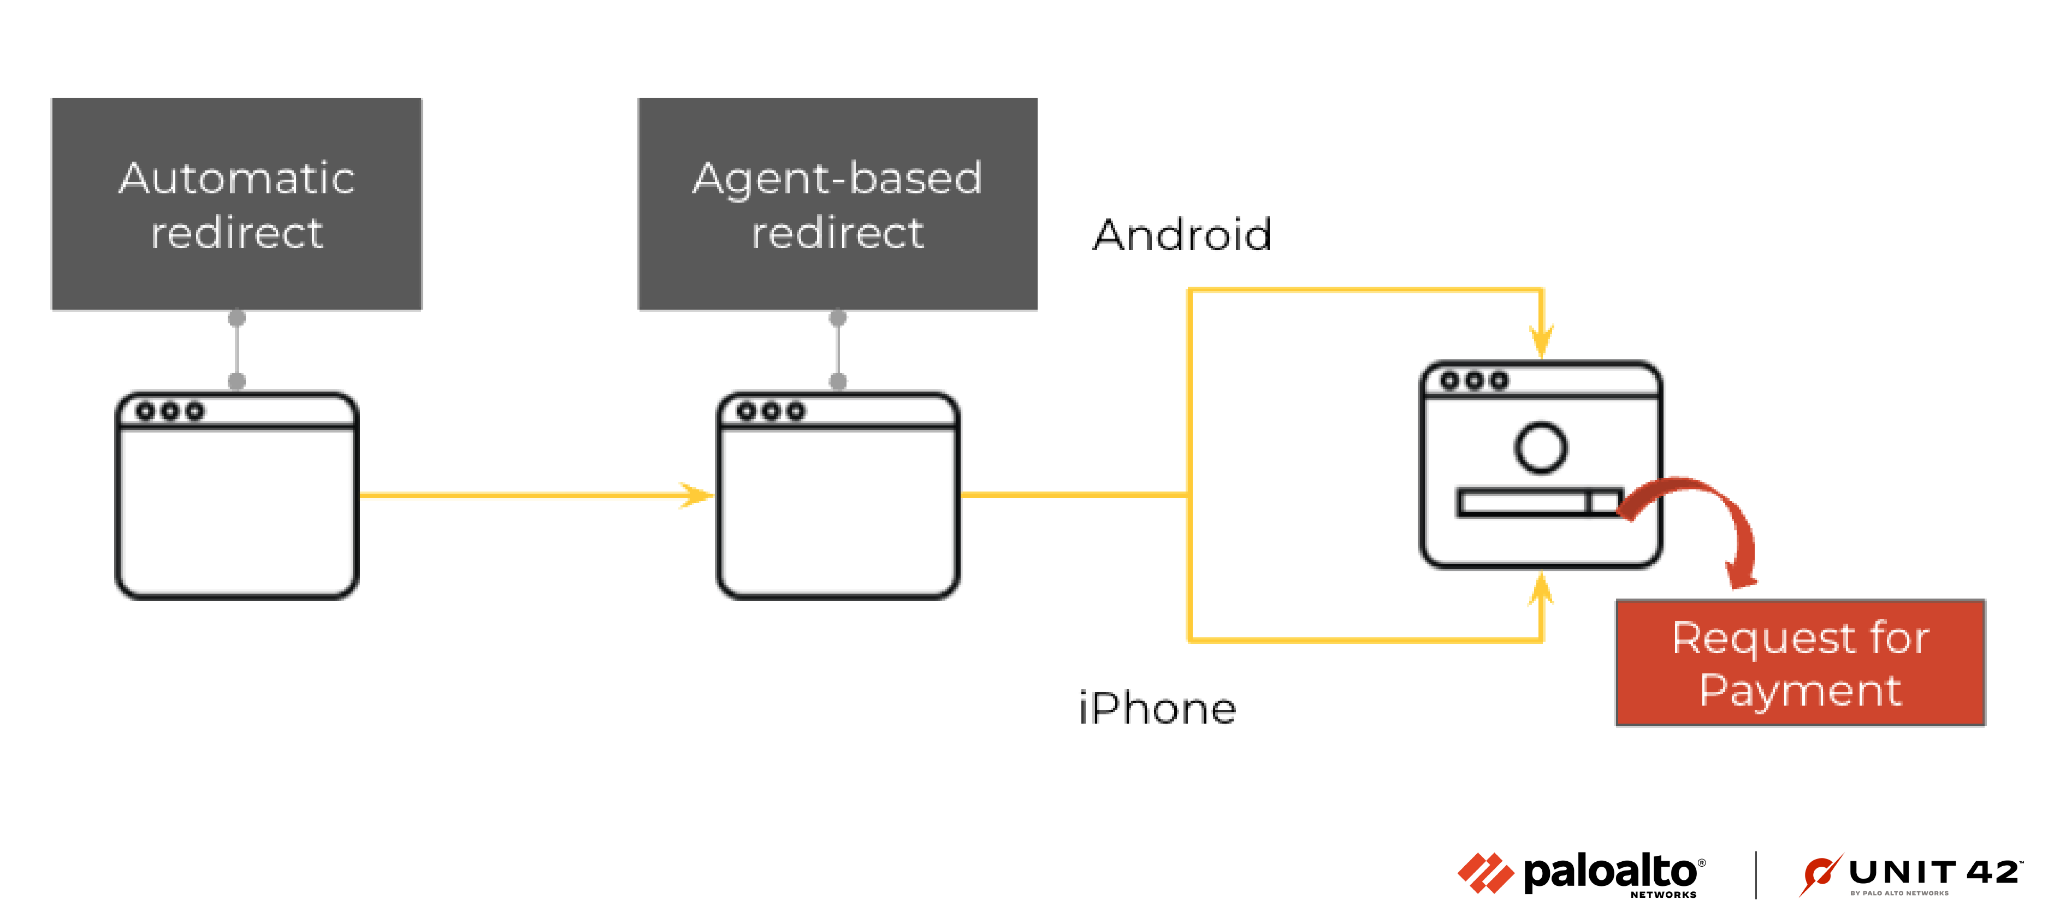 Image 6 is a tree diagram showing the structure of an observed Roaming Mantis campaign in June 2022. Unlike the campaign of March 2022, it ends with both iPhone and Android users getting a request for payment. It starts with an automatic redirect. 